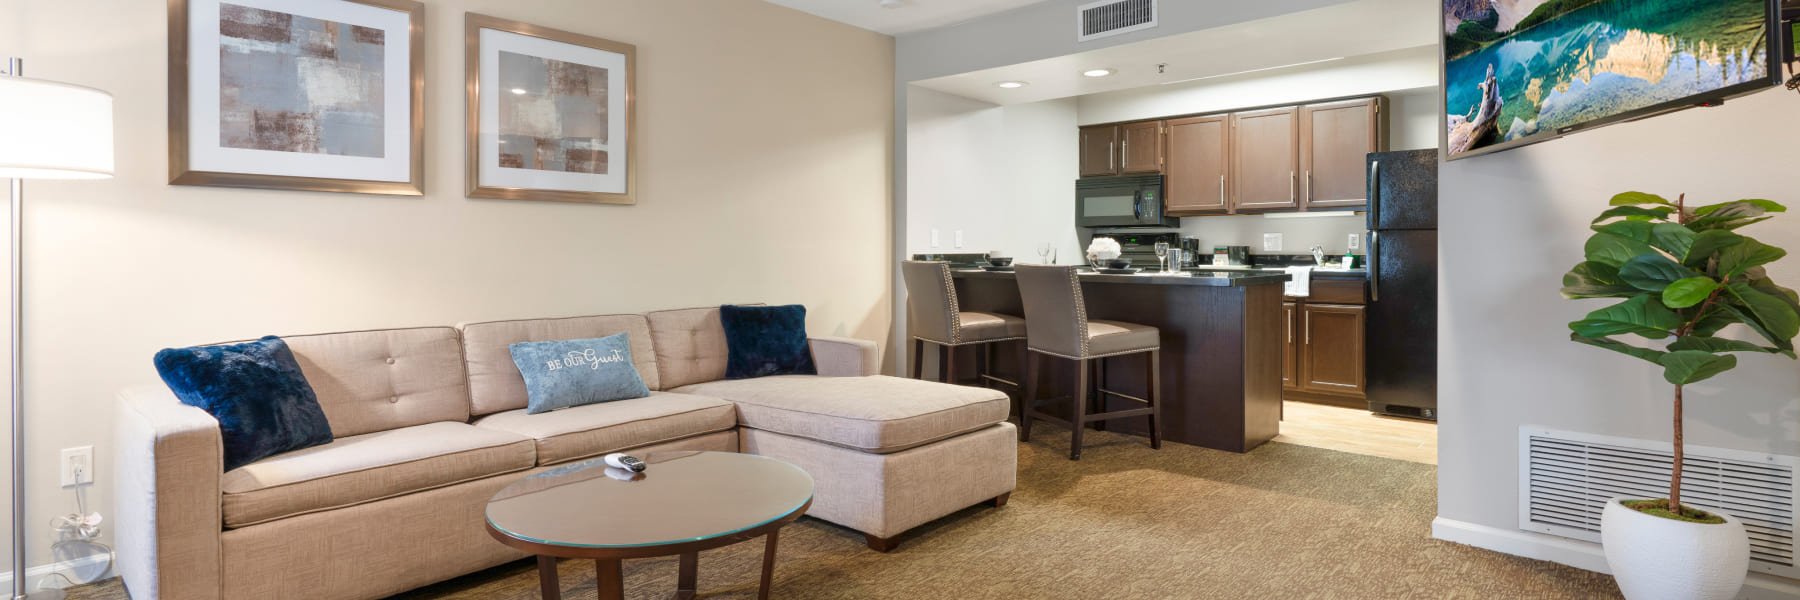 Accommodations at Chase Suite Hotel Brea Fullerton Brea, California 